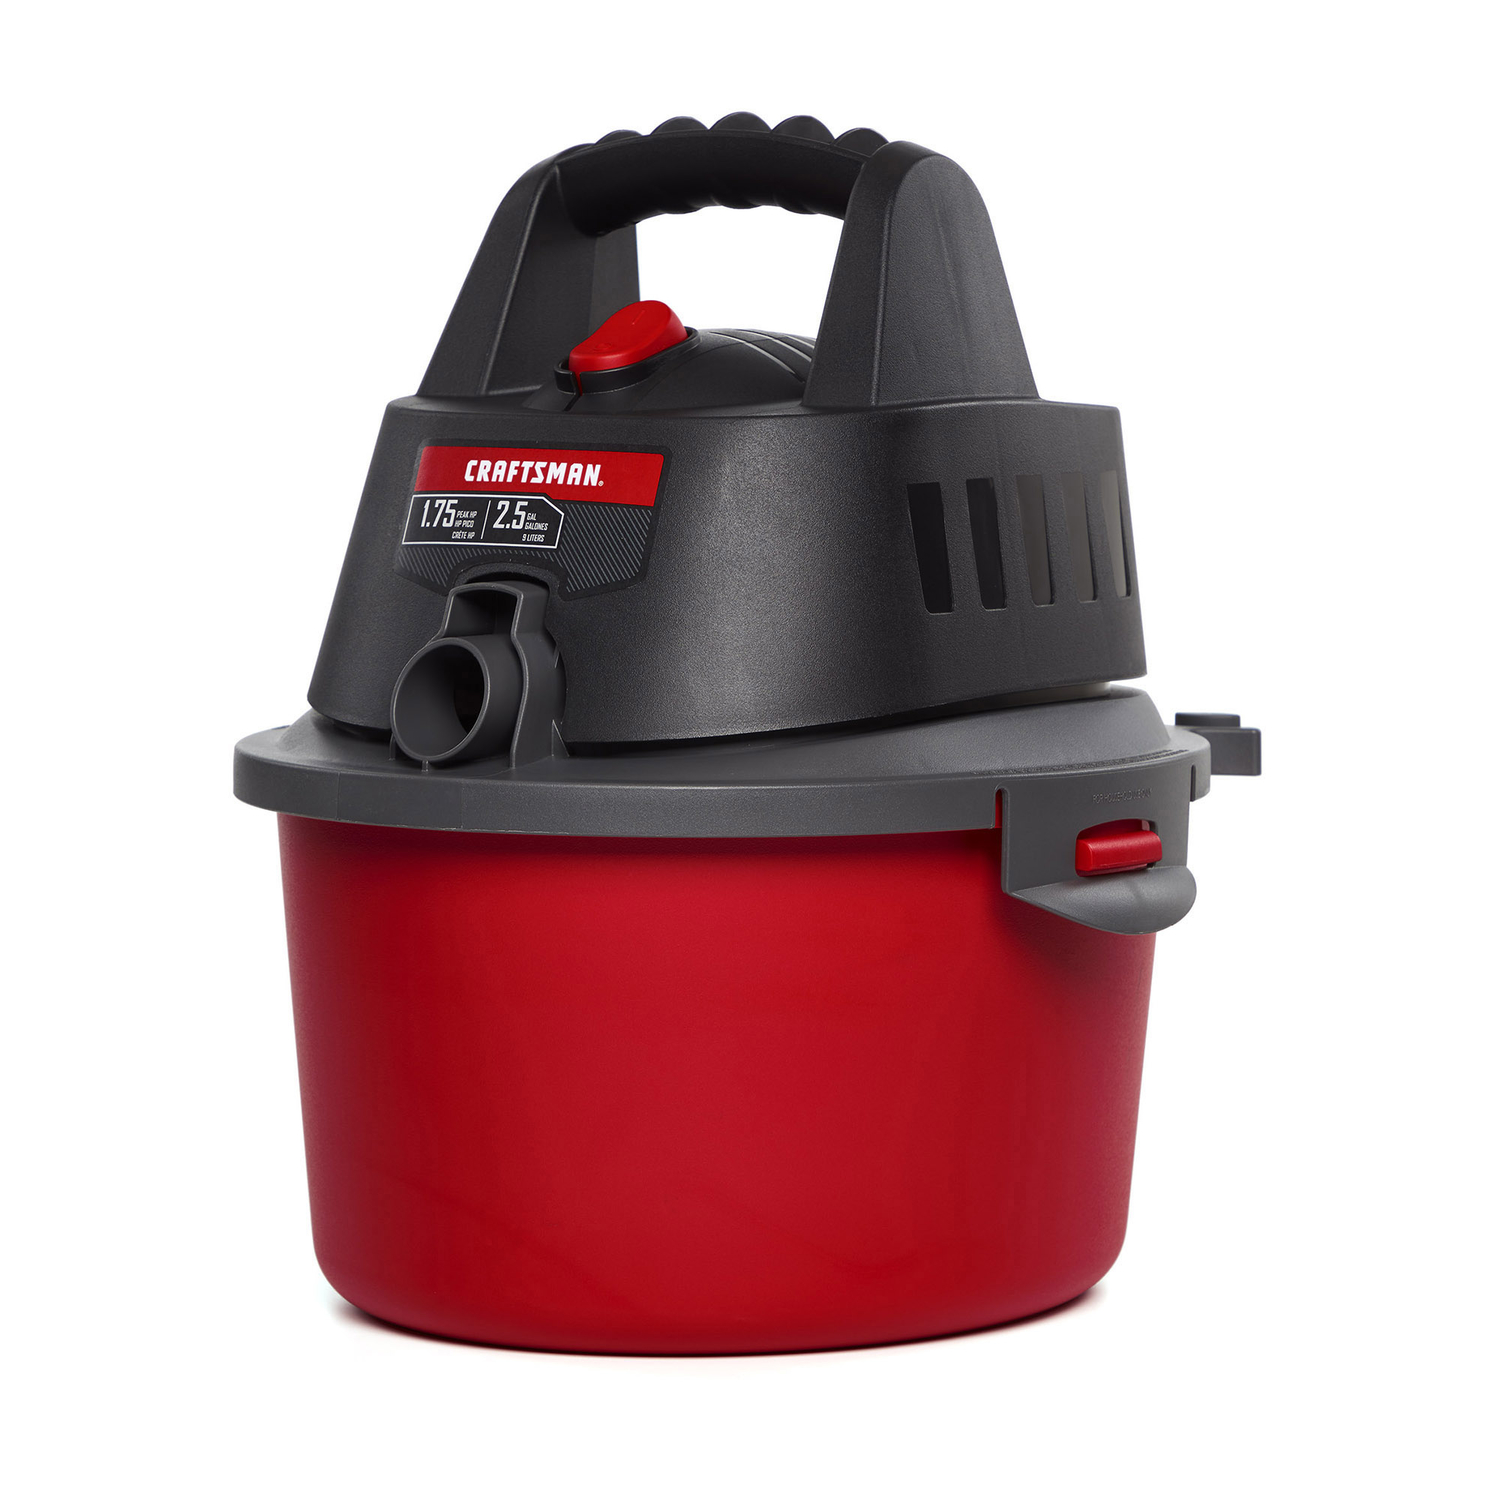 UPC 648846007380 product image for Craftsman 2.5 gal. Corded Wet/Dry Vacuum 4 amps 120 volt 1.75 hp Red 7.9 lb. | upcitemdb.com